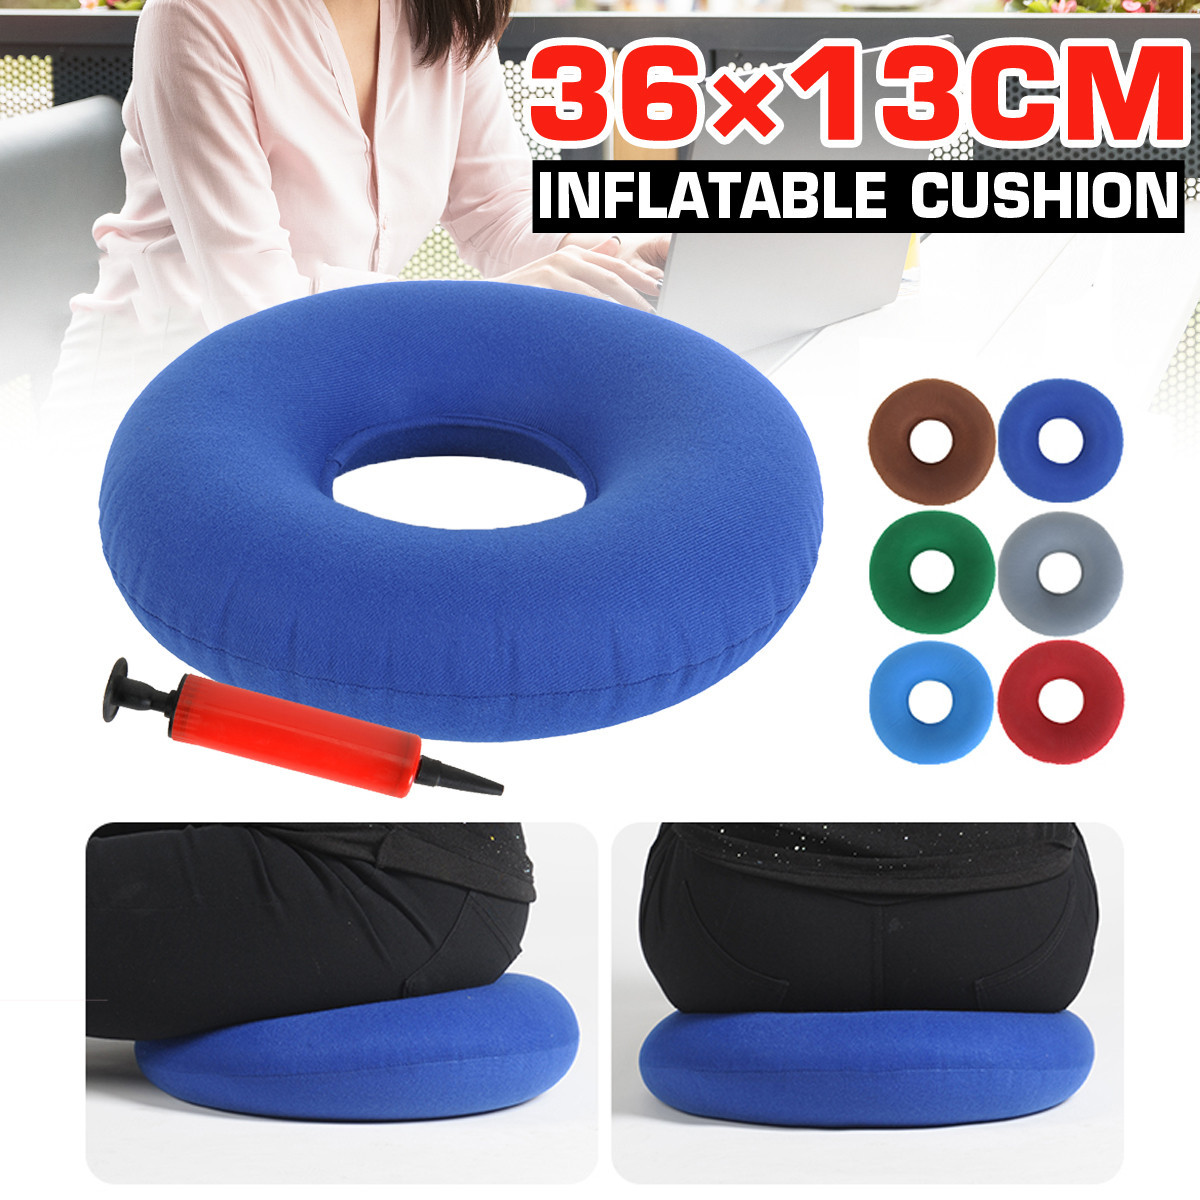 36x13CM-Round-Inflatable-Cushion-Seat-Pad-Massage-Cushion-Mat-Hemorrhoid-Pillow-With-Pump-for-Office-1811922-1